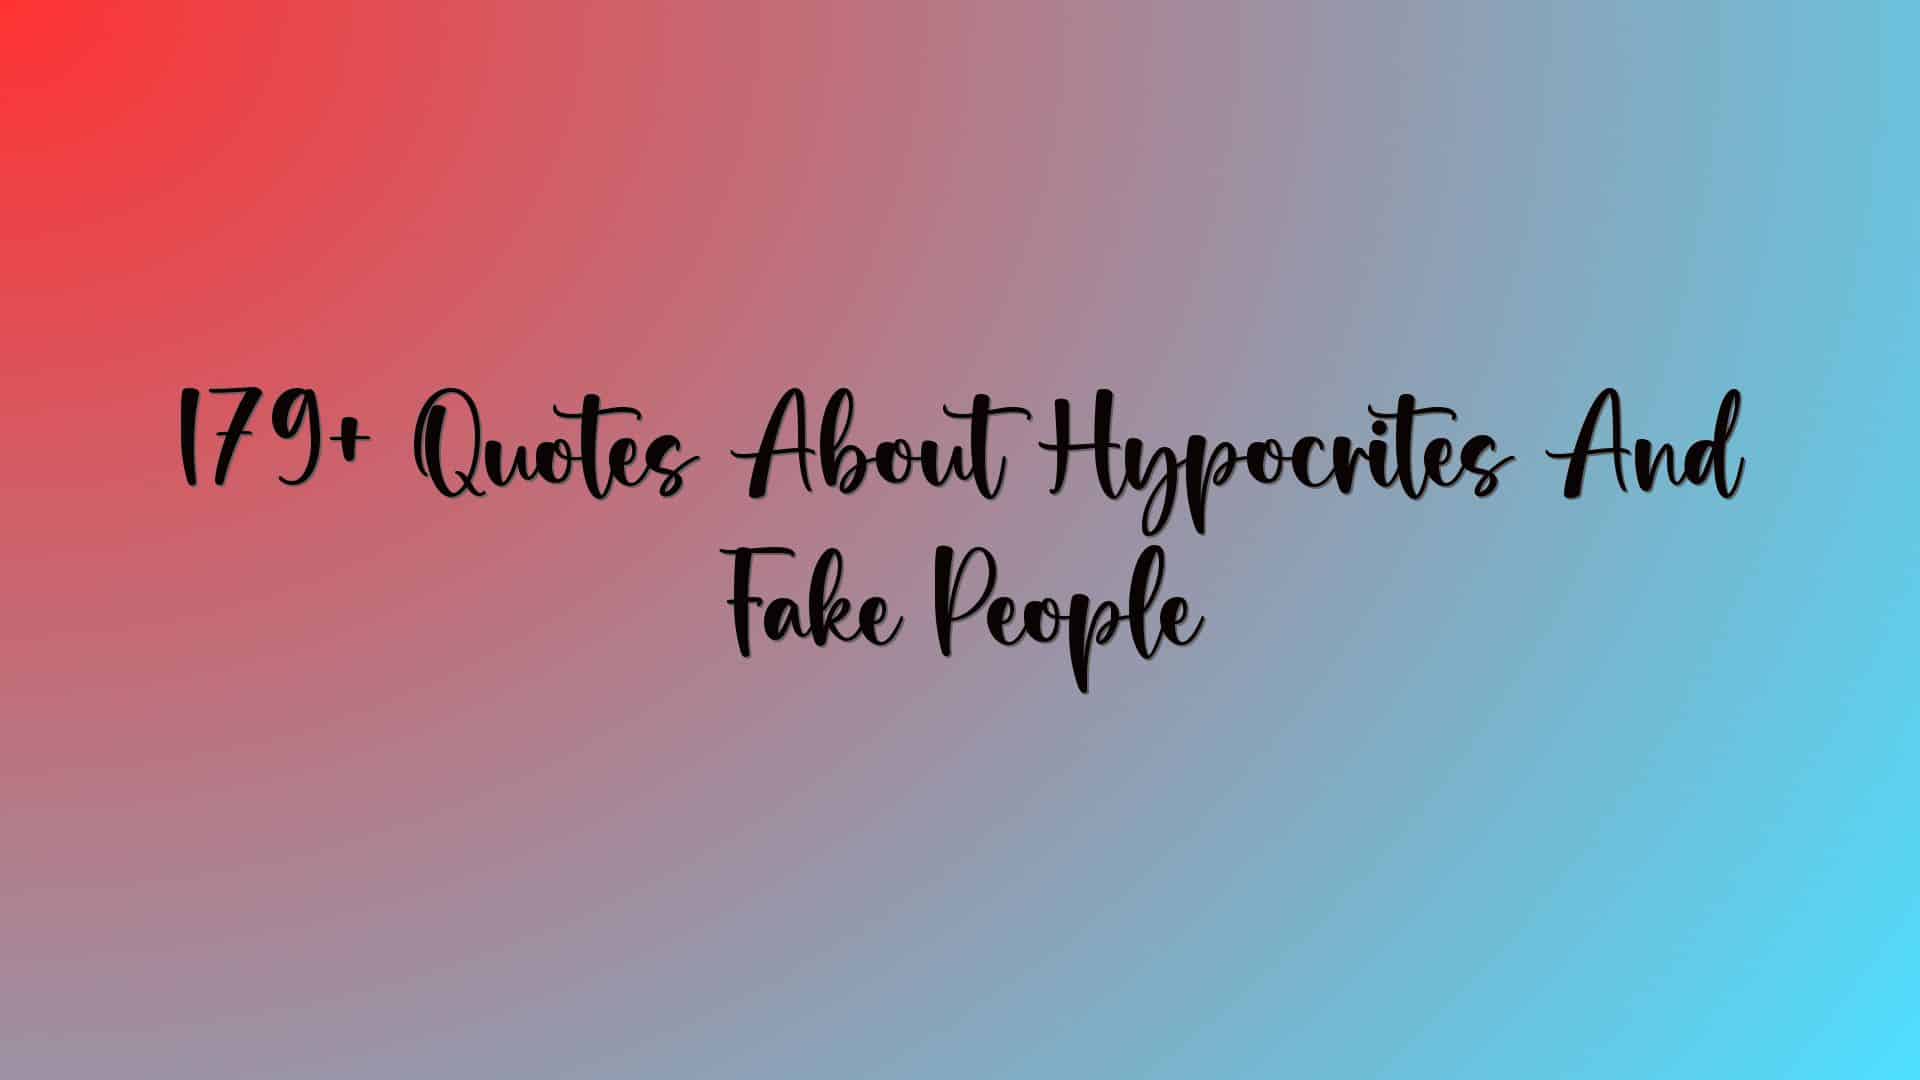 179+ Quotes About Hypocrites And Fake People